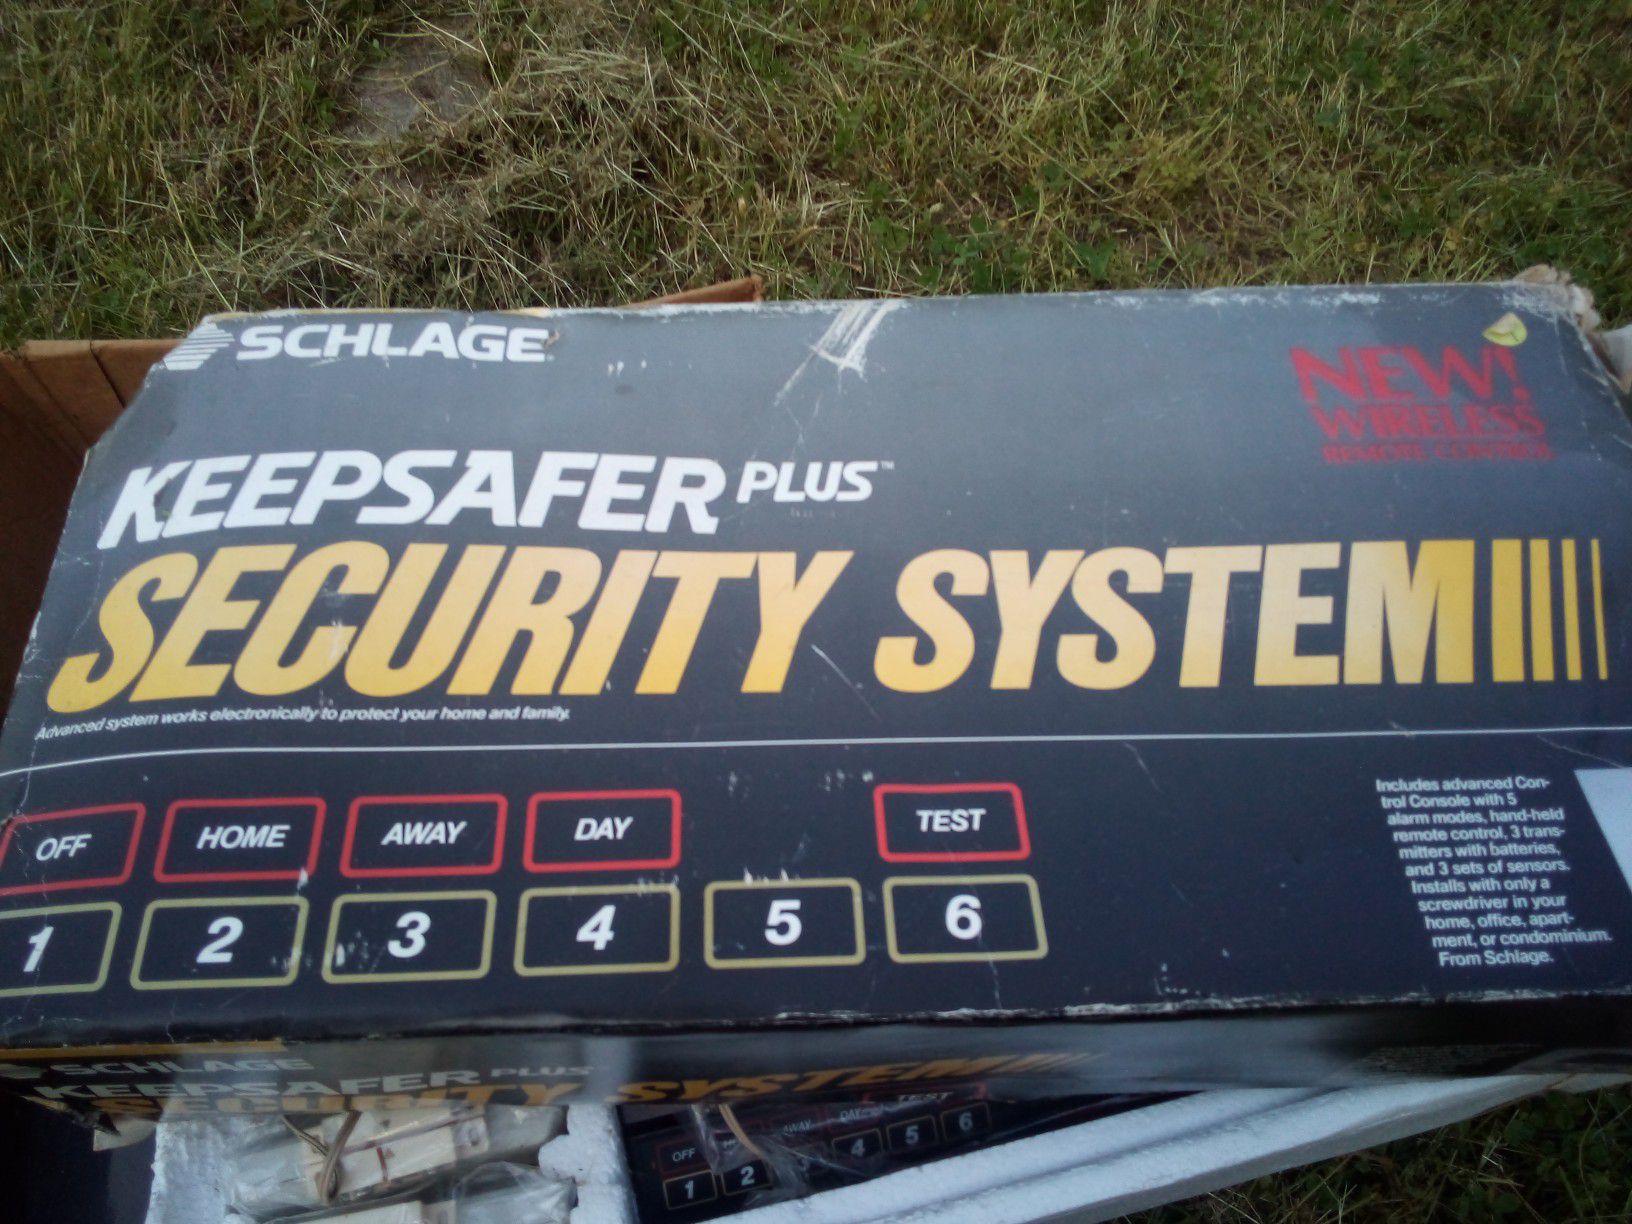 Schlager keeper plus security system